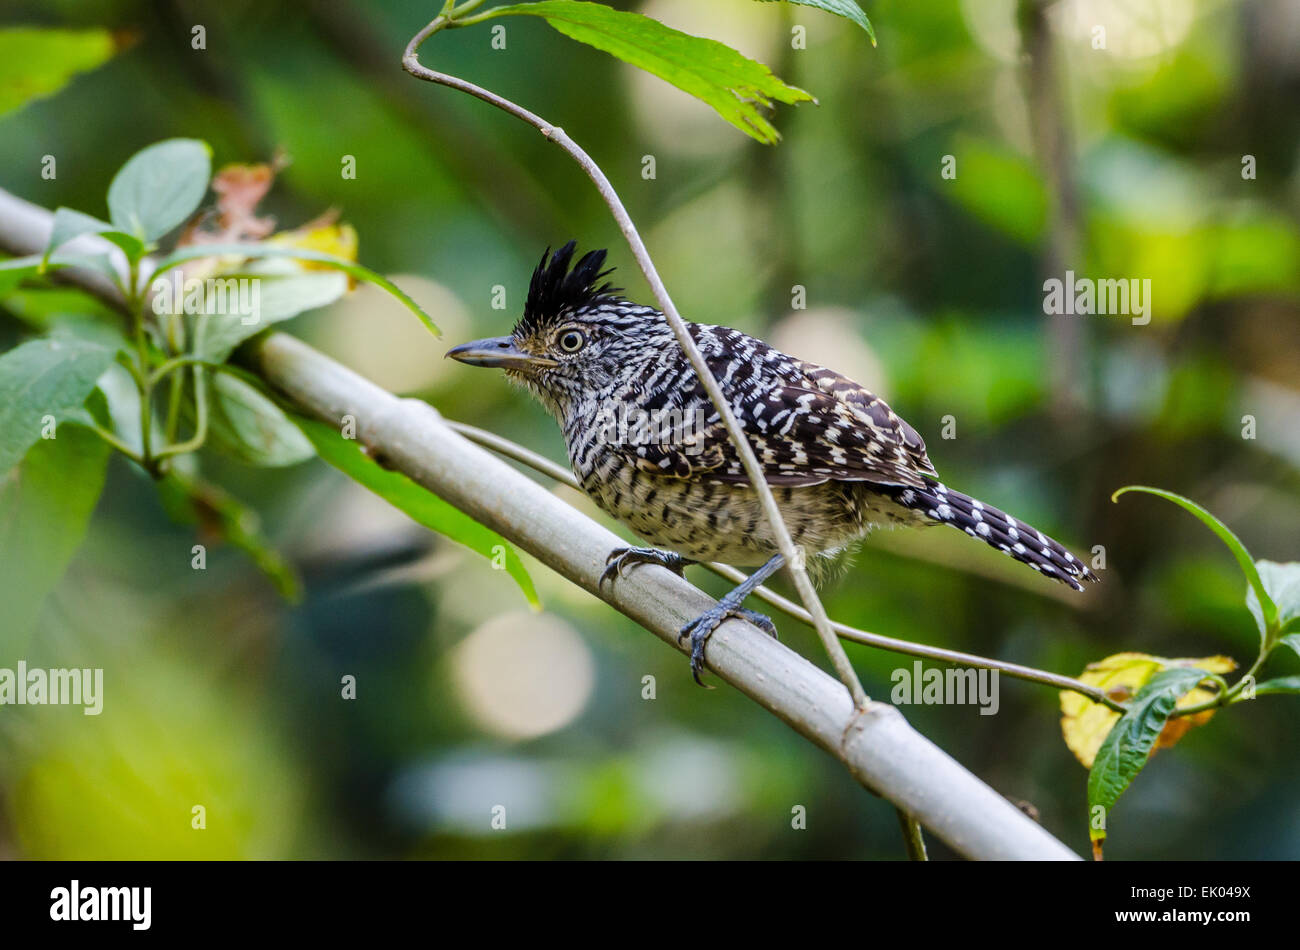 A male Barred Antshrike (Thamnophilus doliatus) perched on a branch. Panama, Central America. Stock Photo